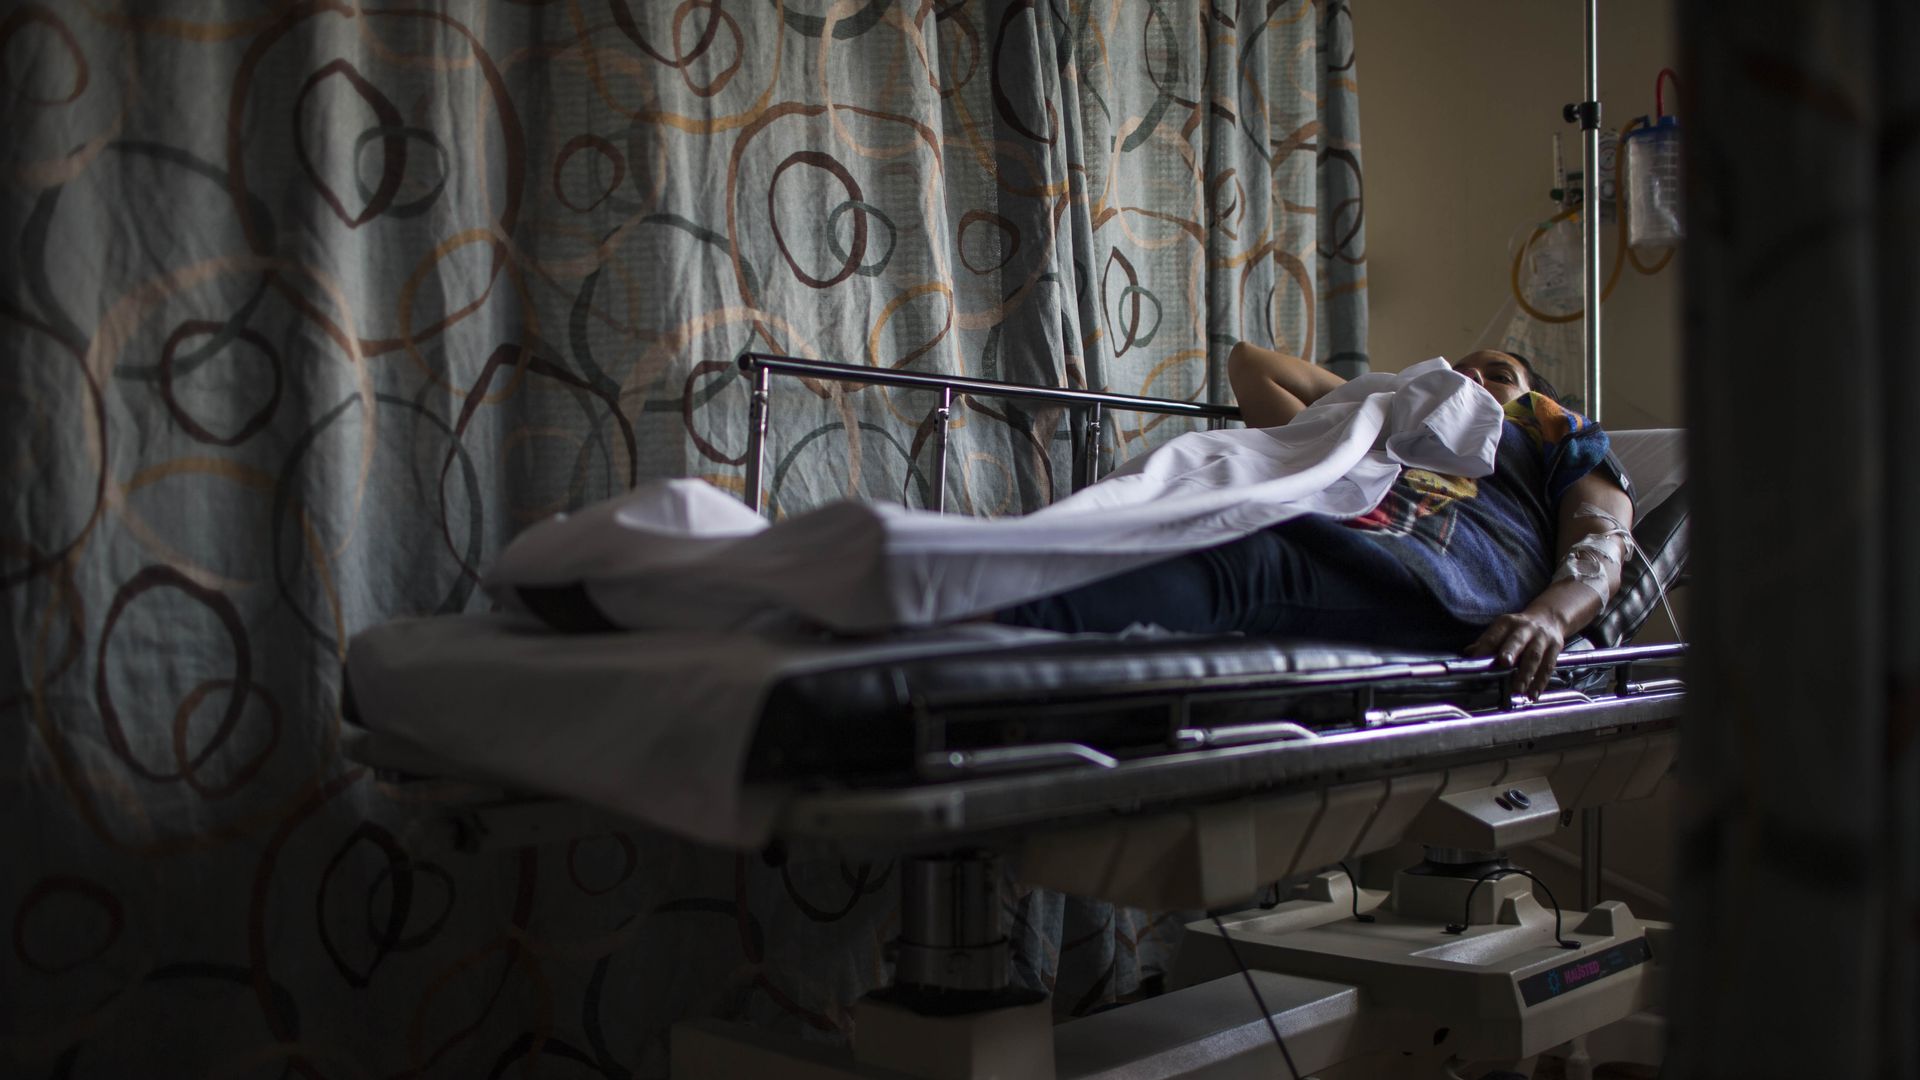 A person lays on a hospital bed in a dark emergency room.